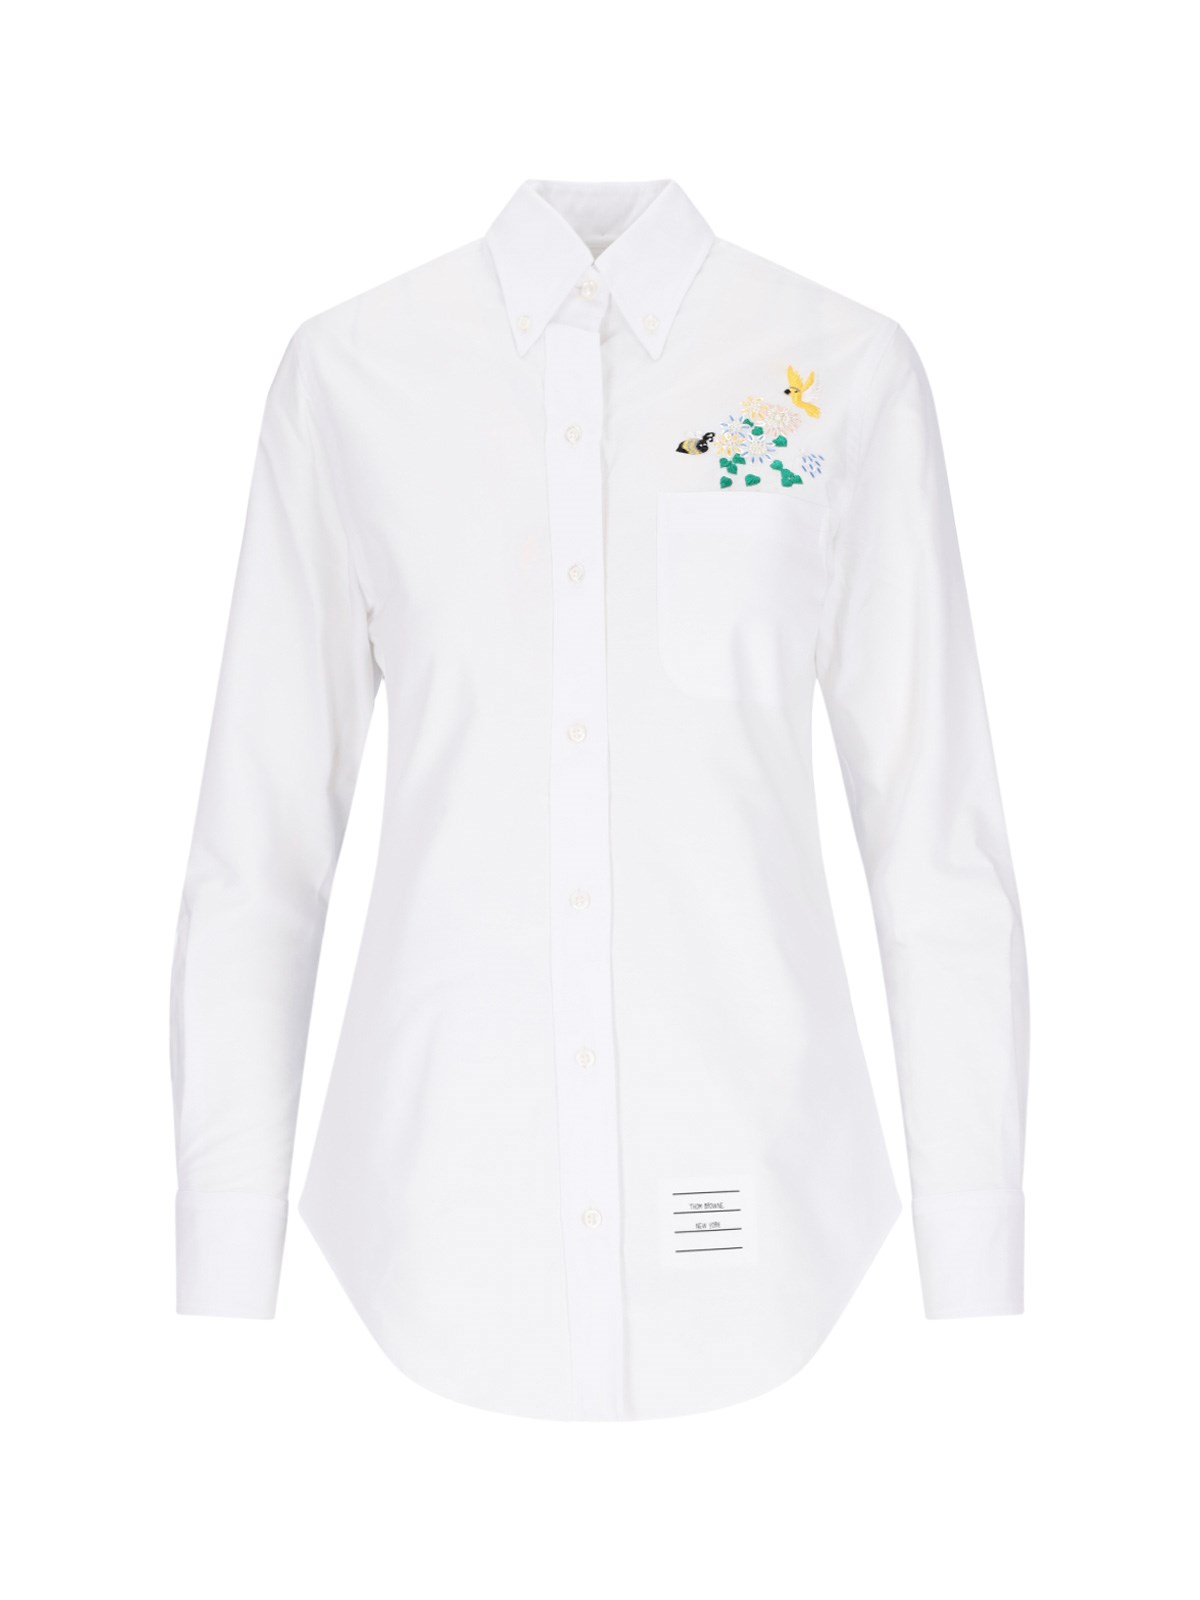 Thom Browne Embroidery Shirt In White